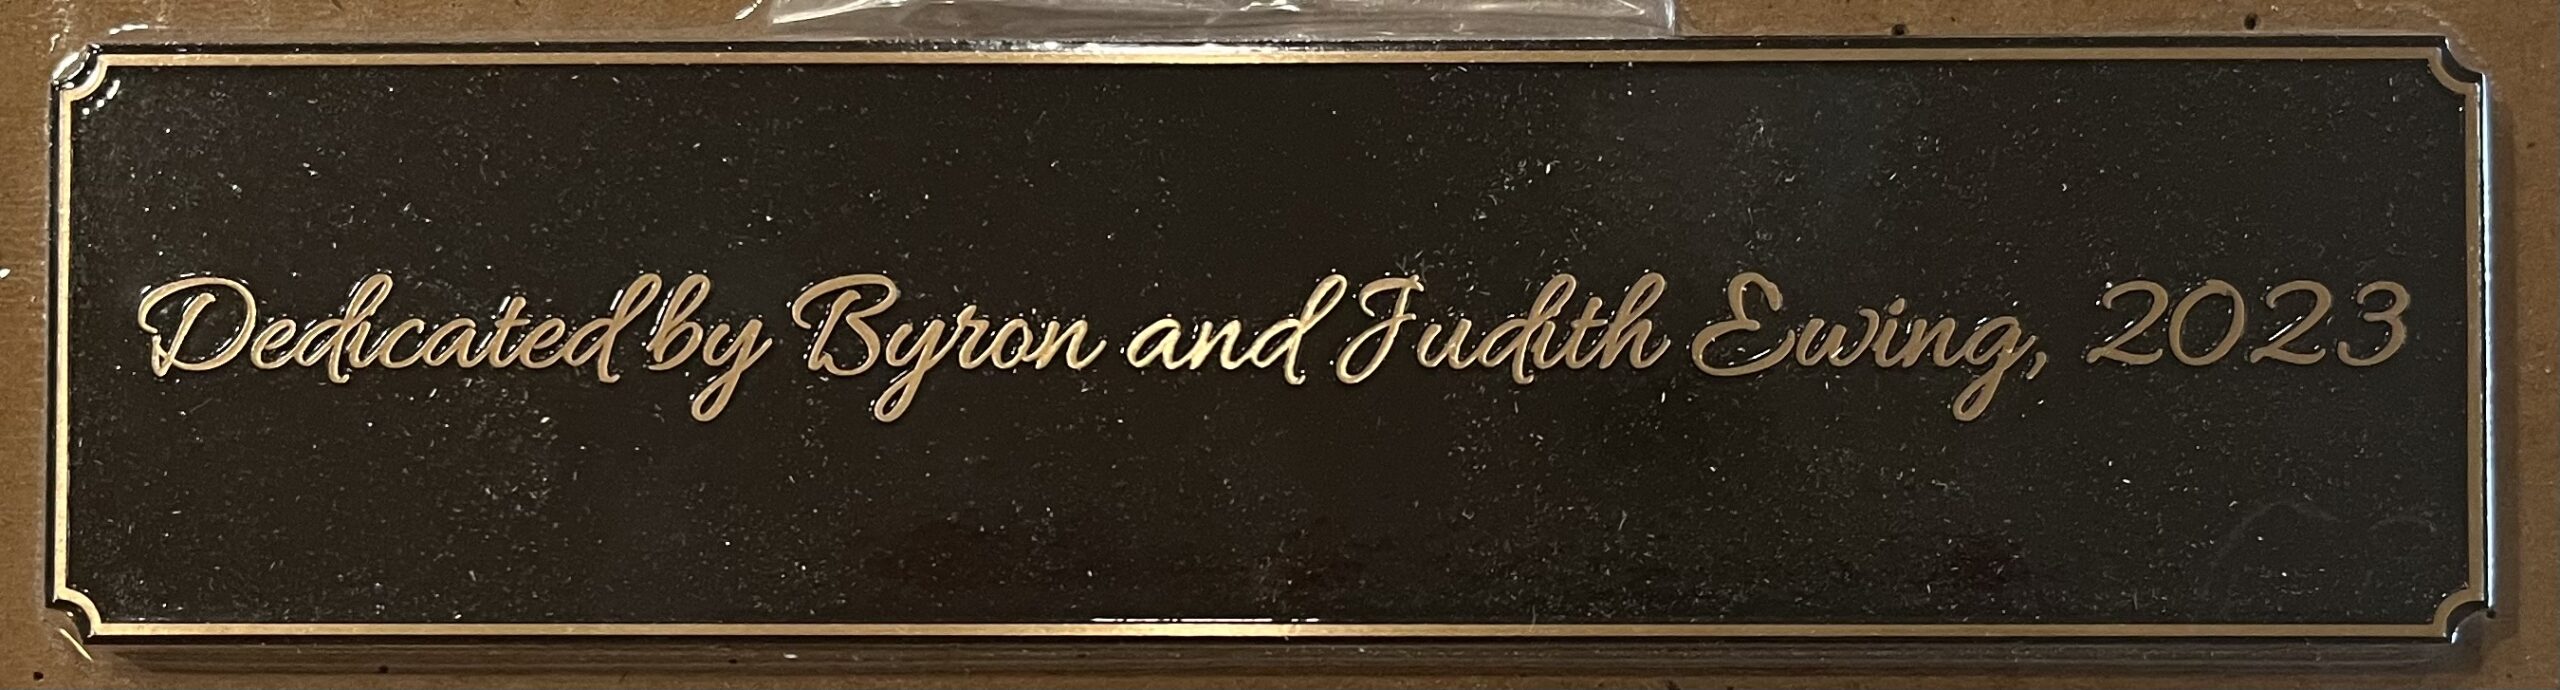 Customized Engraved Metal Plaques for Business